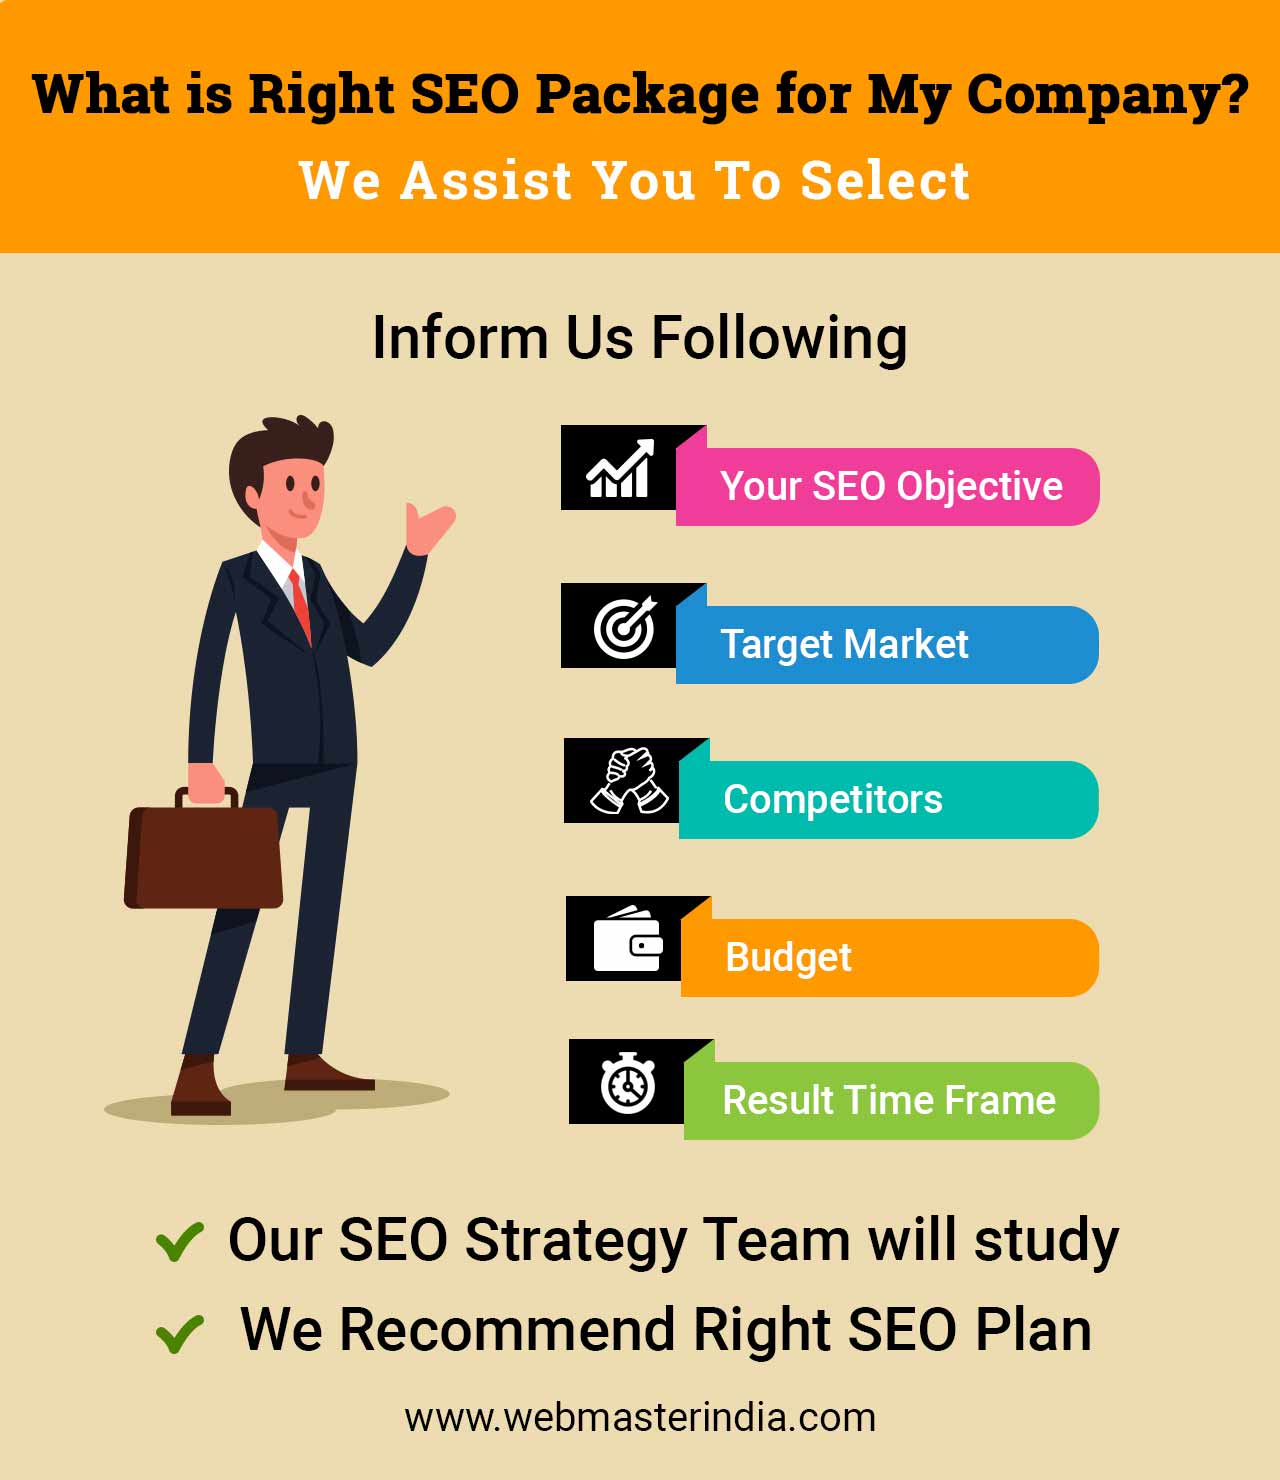 What is Right SEO Package for My Company?